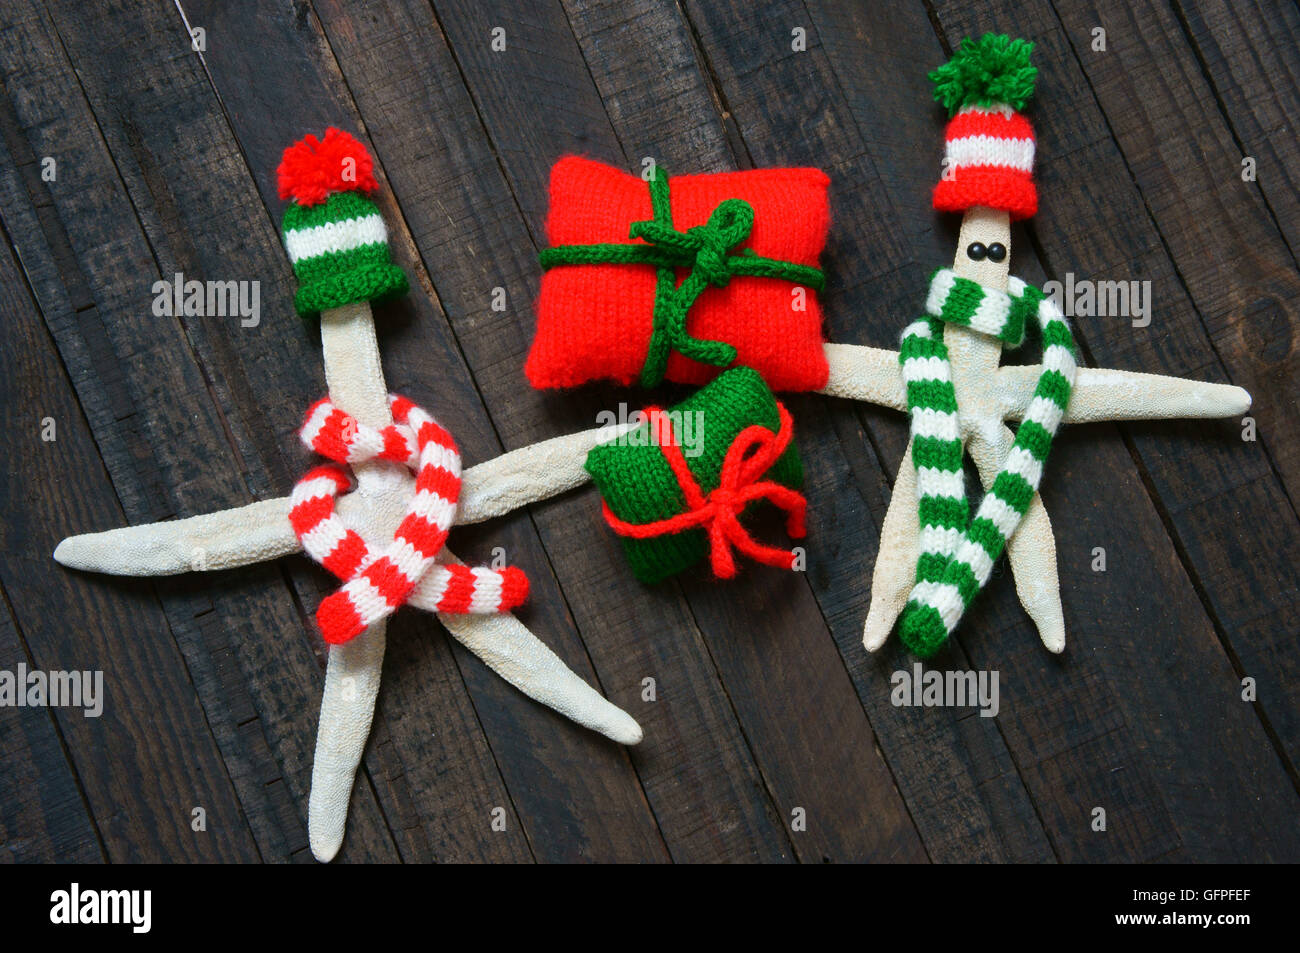 Christmas ornament for winter holiday, red and green knitted hat, scaft, sock, gift  in small size, symbol for xmas, noel season Stock Photo